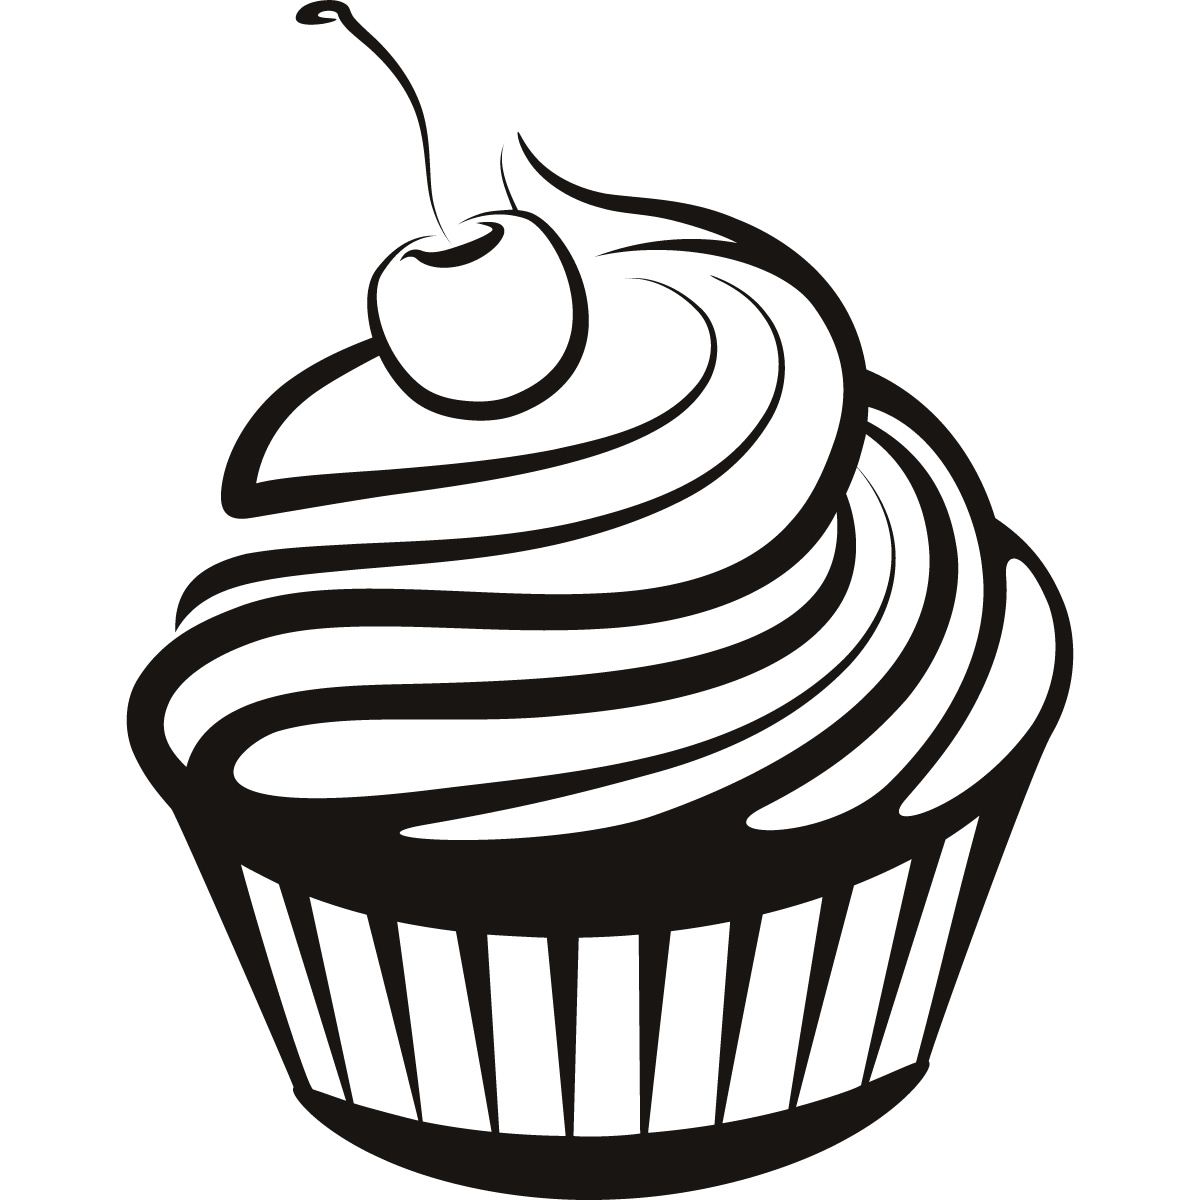 Cupcake Clipart Black And White - ClipArt Best